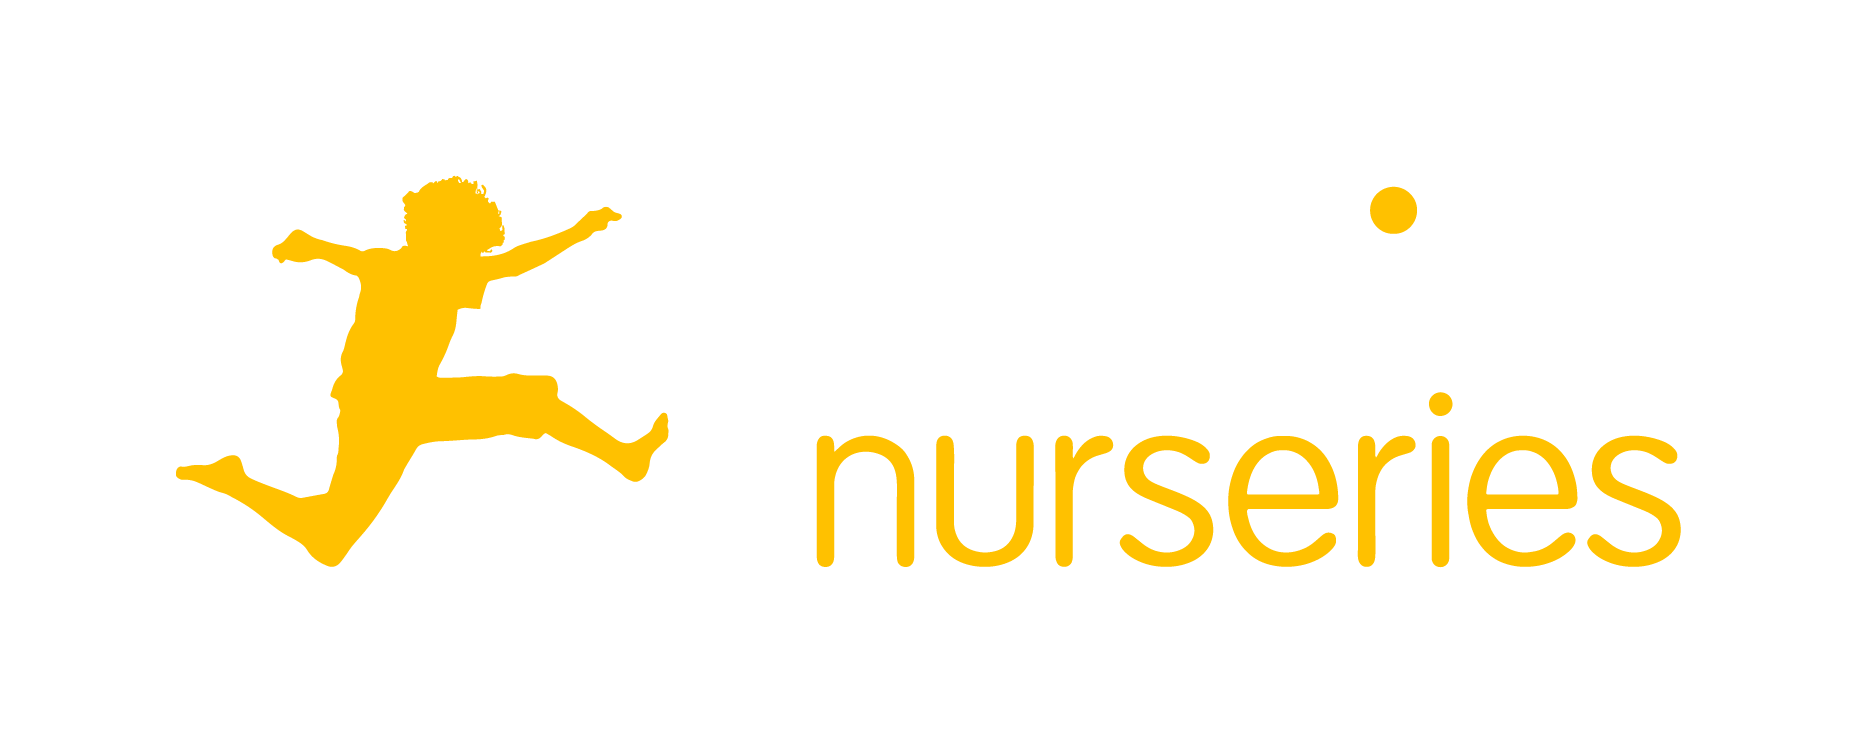 A silhouette of a child joyfully jumping to the left above the word "nurseries" in lowercase, bold yellow font. a small yellow dot floats to the right above the text.